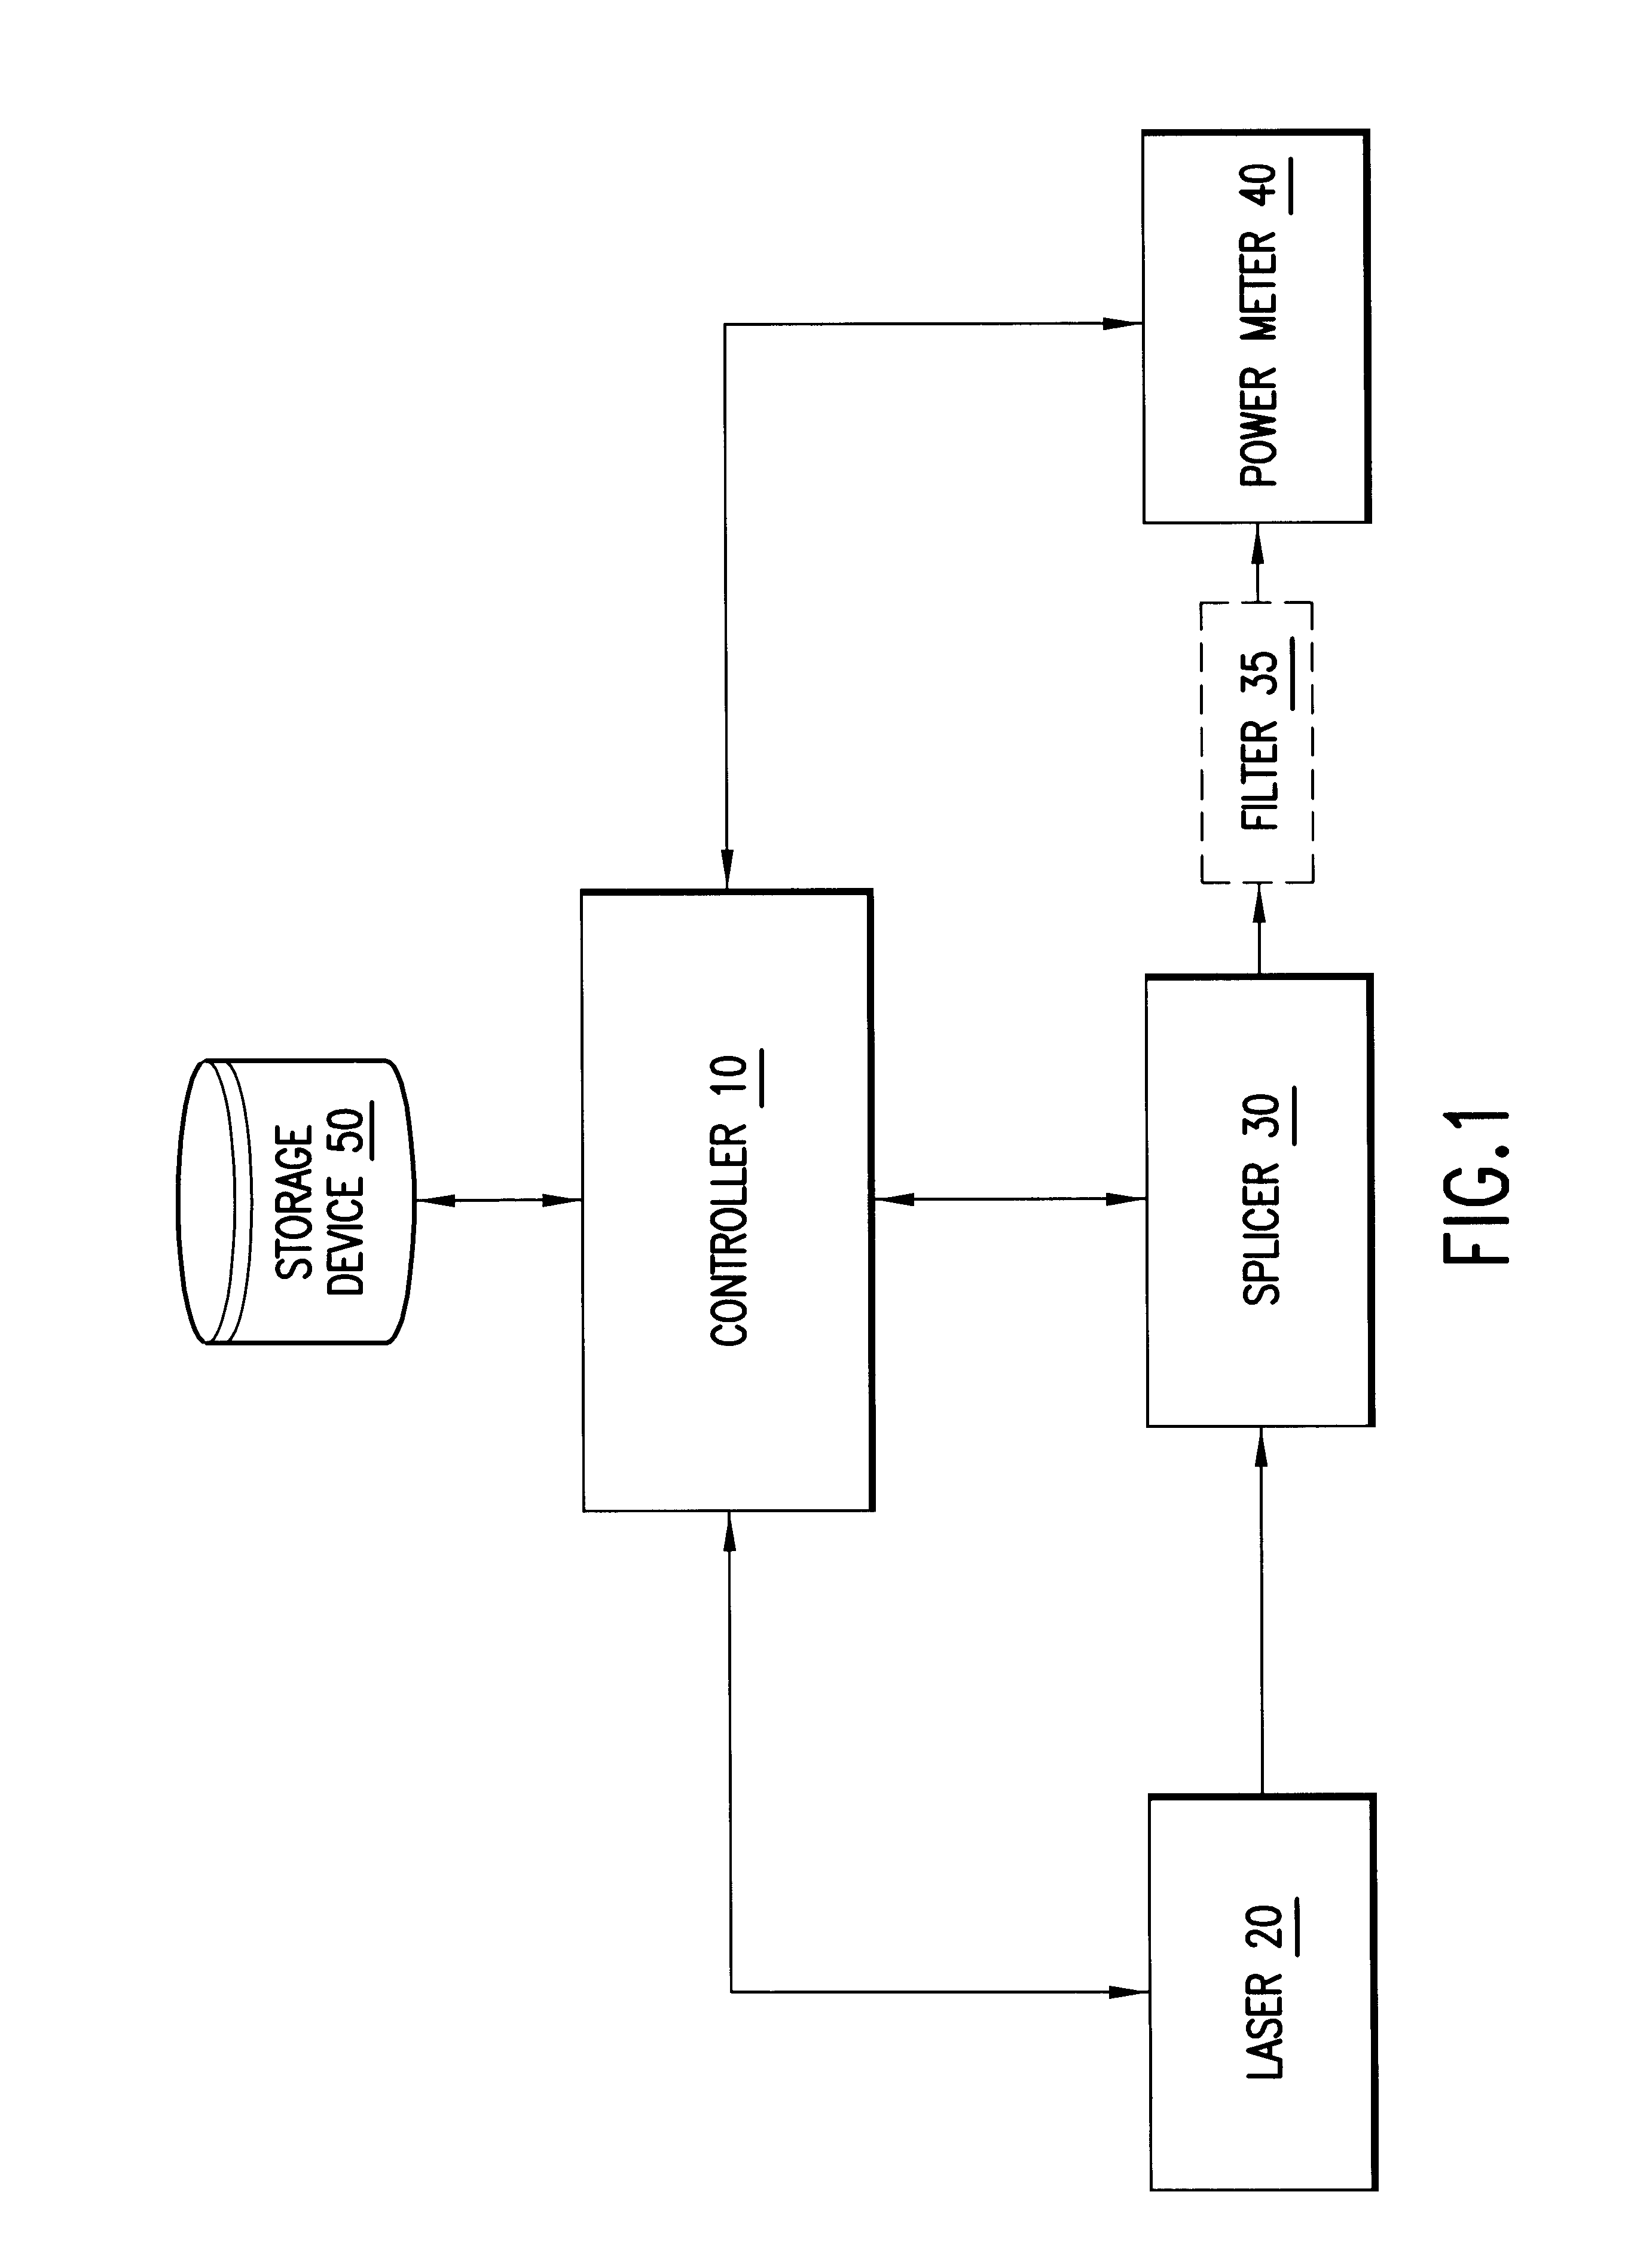 Method and system for controlling splice attenuation